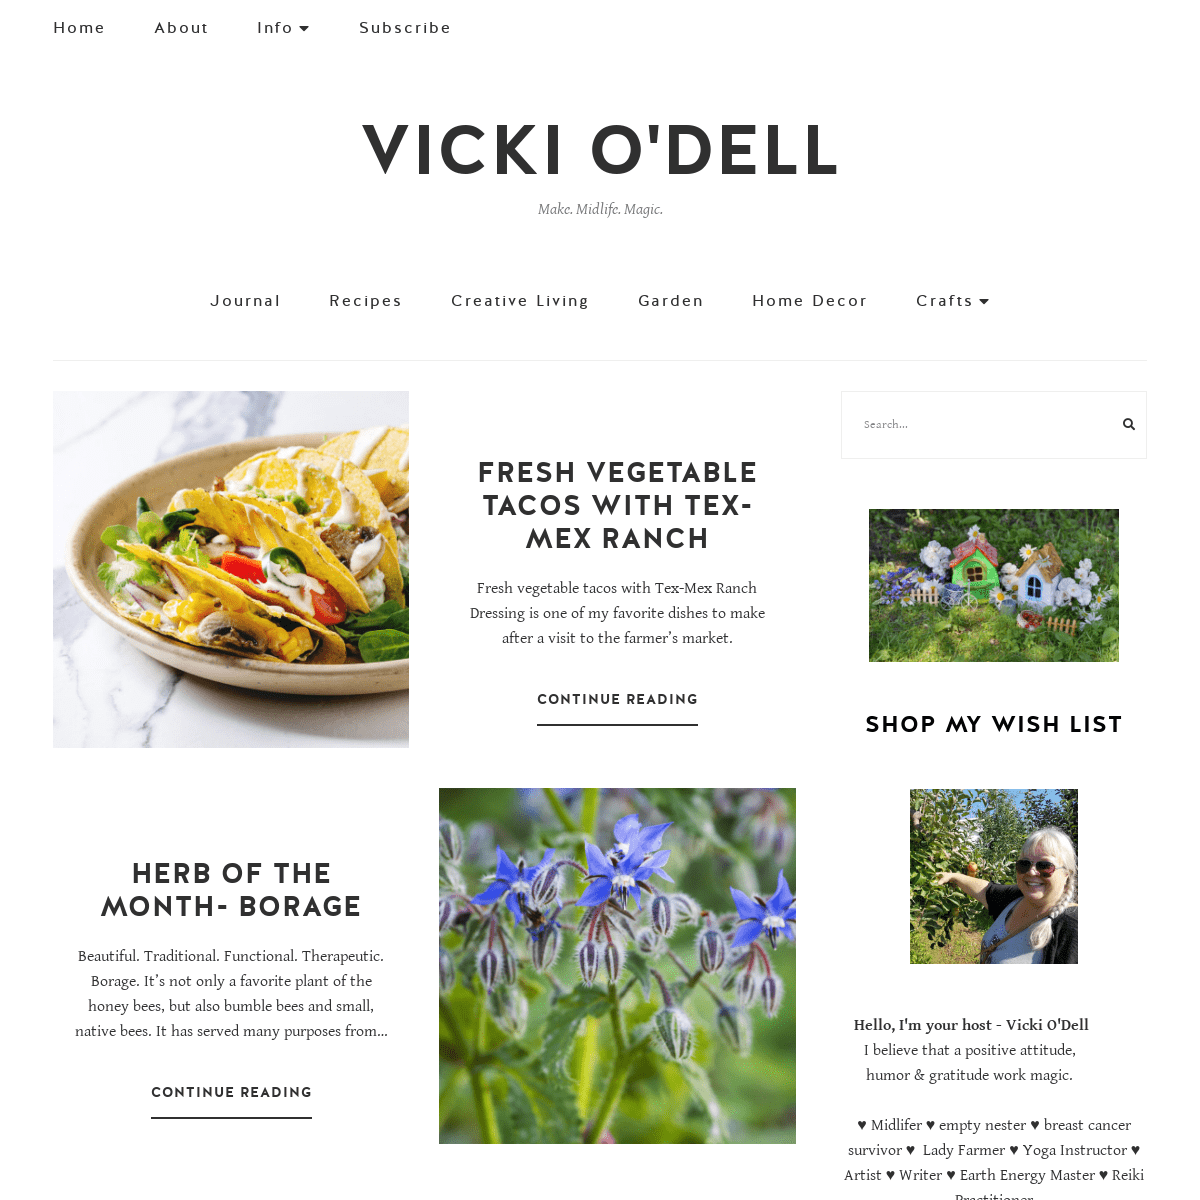 A complete backup of https://vickiodell.com